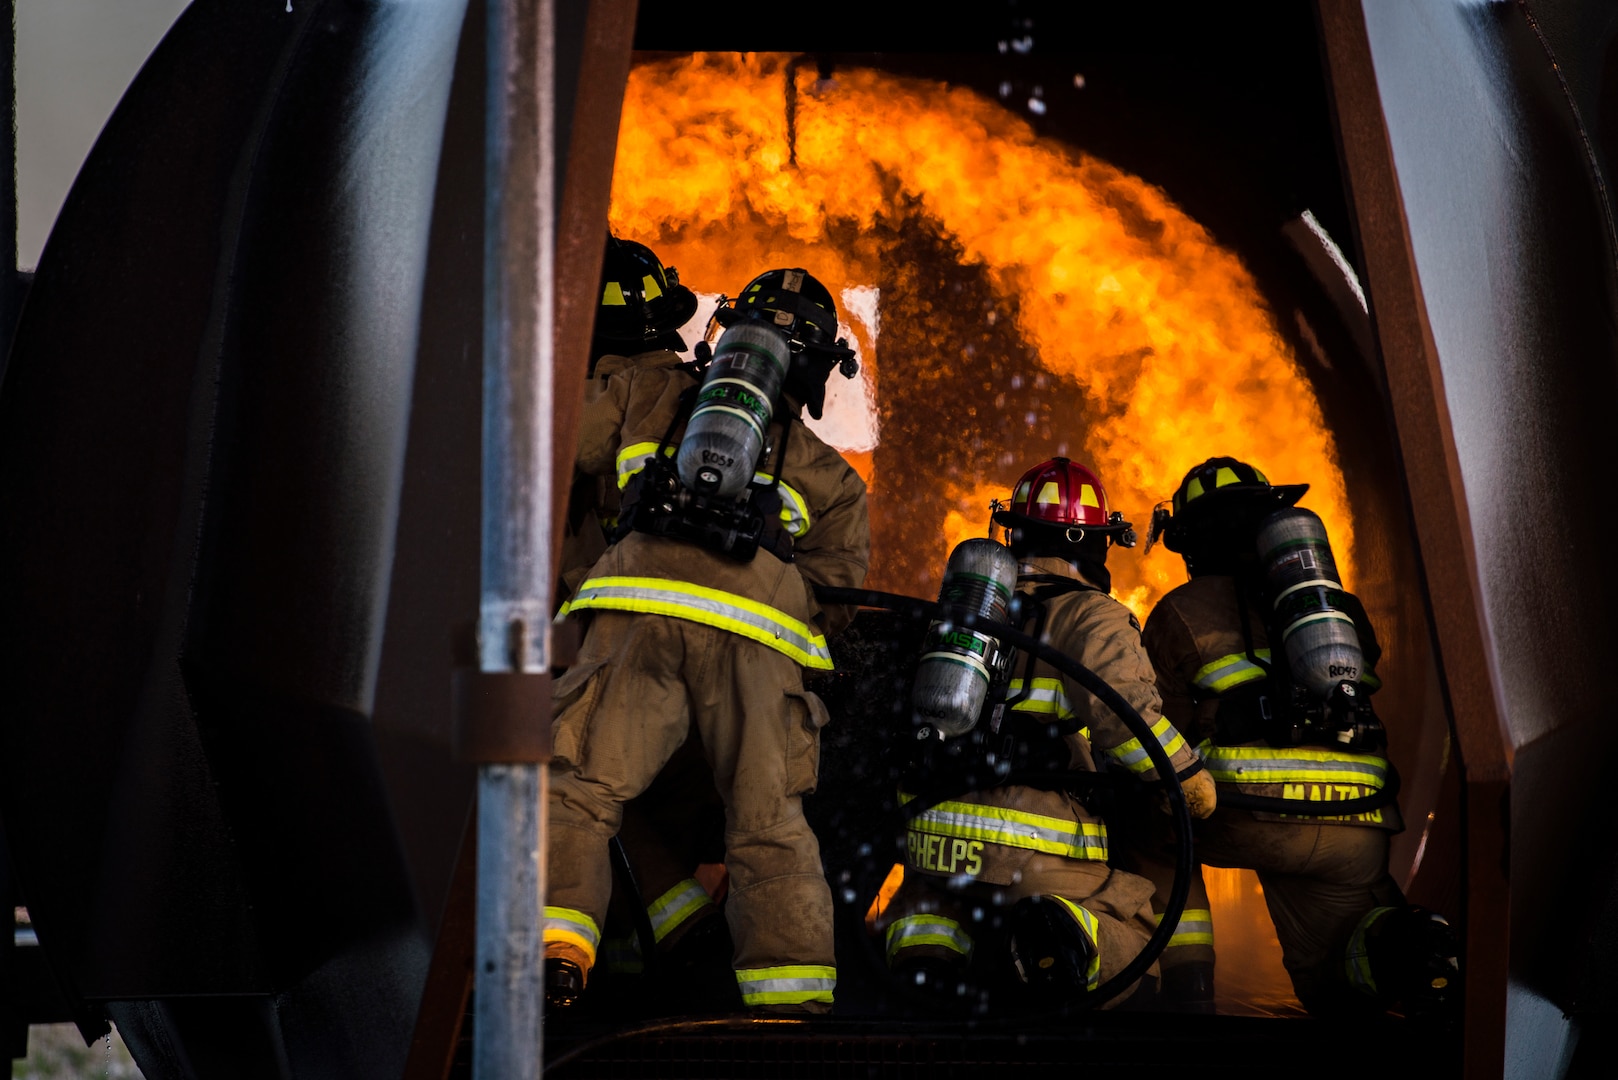 Firefighters from Joint Base San Antonio-Randolph extinguish a fire during training April 11, 2018 at the Camp Talon fire training grounds on JBSA-Randolph. The training takes place quarterly and offers an opportunity for new firefighters to become more confident while fighting fires, but it also gives seasoned Airmen a chance to sharpen their skills and get a head start to the next step in their careers. (U.S. Air Force photo by Senior Airman Gwendalyn Smith)